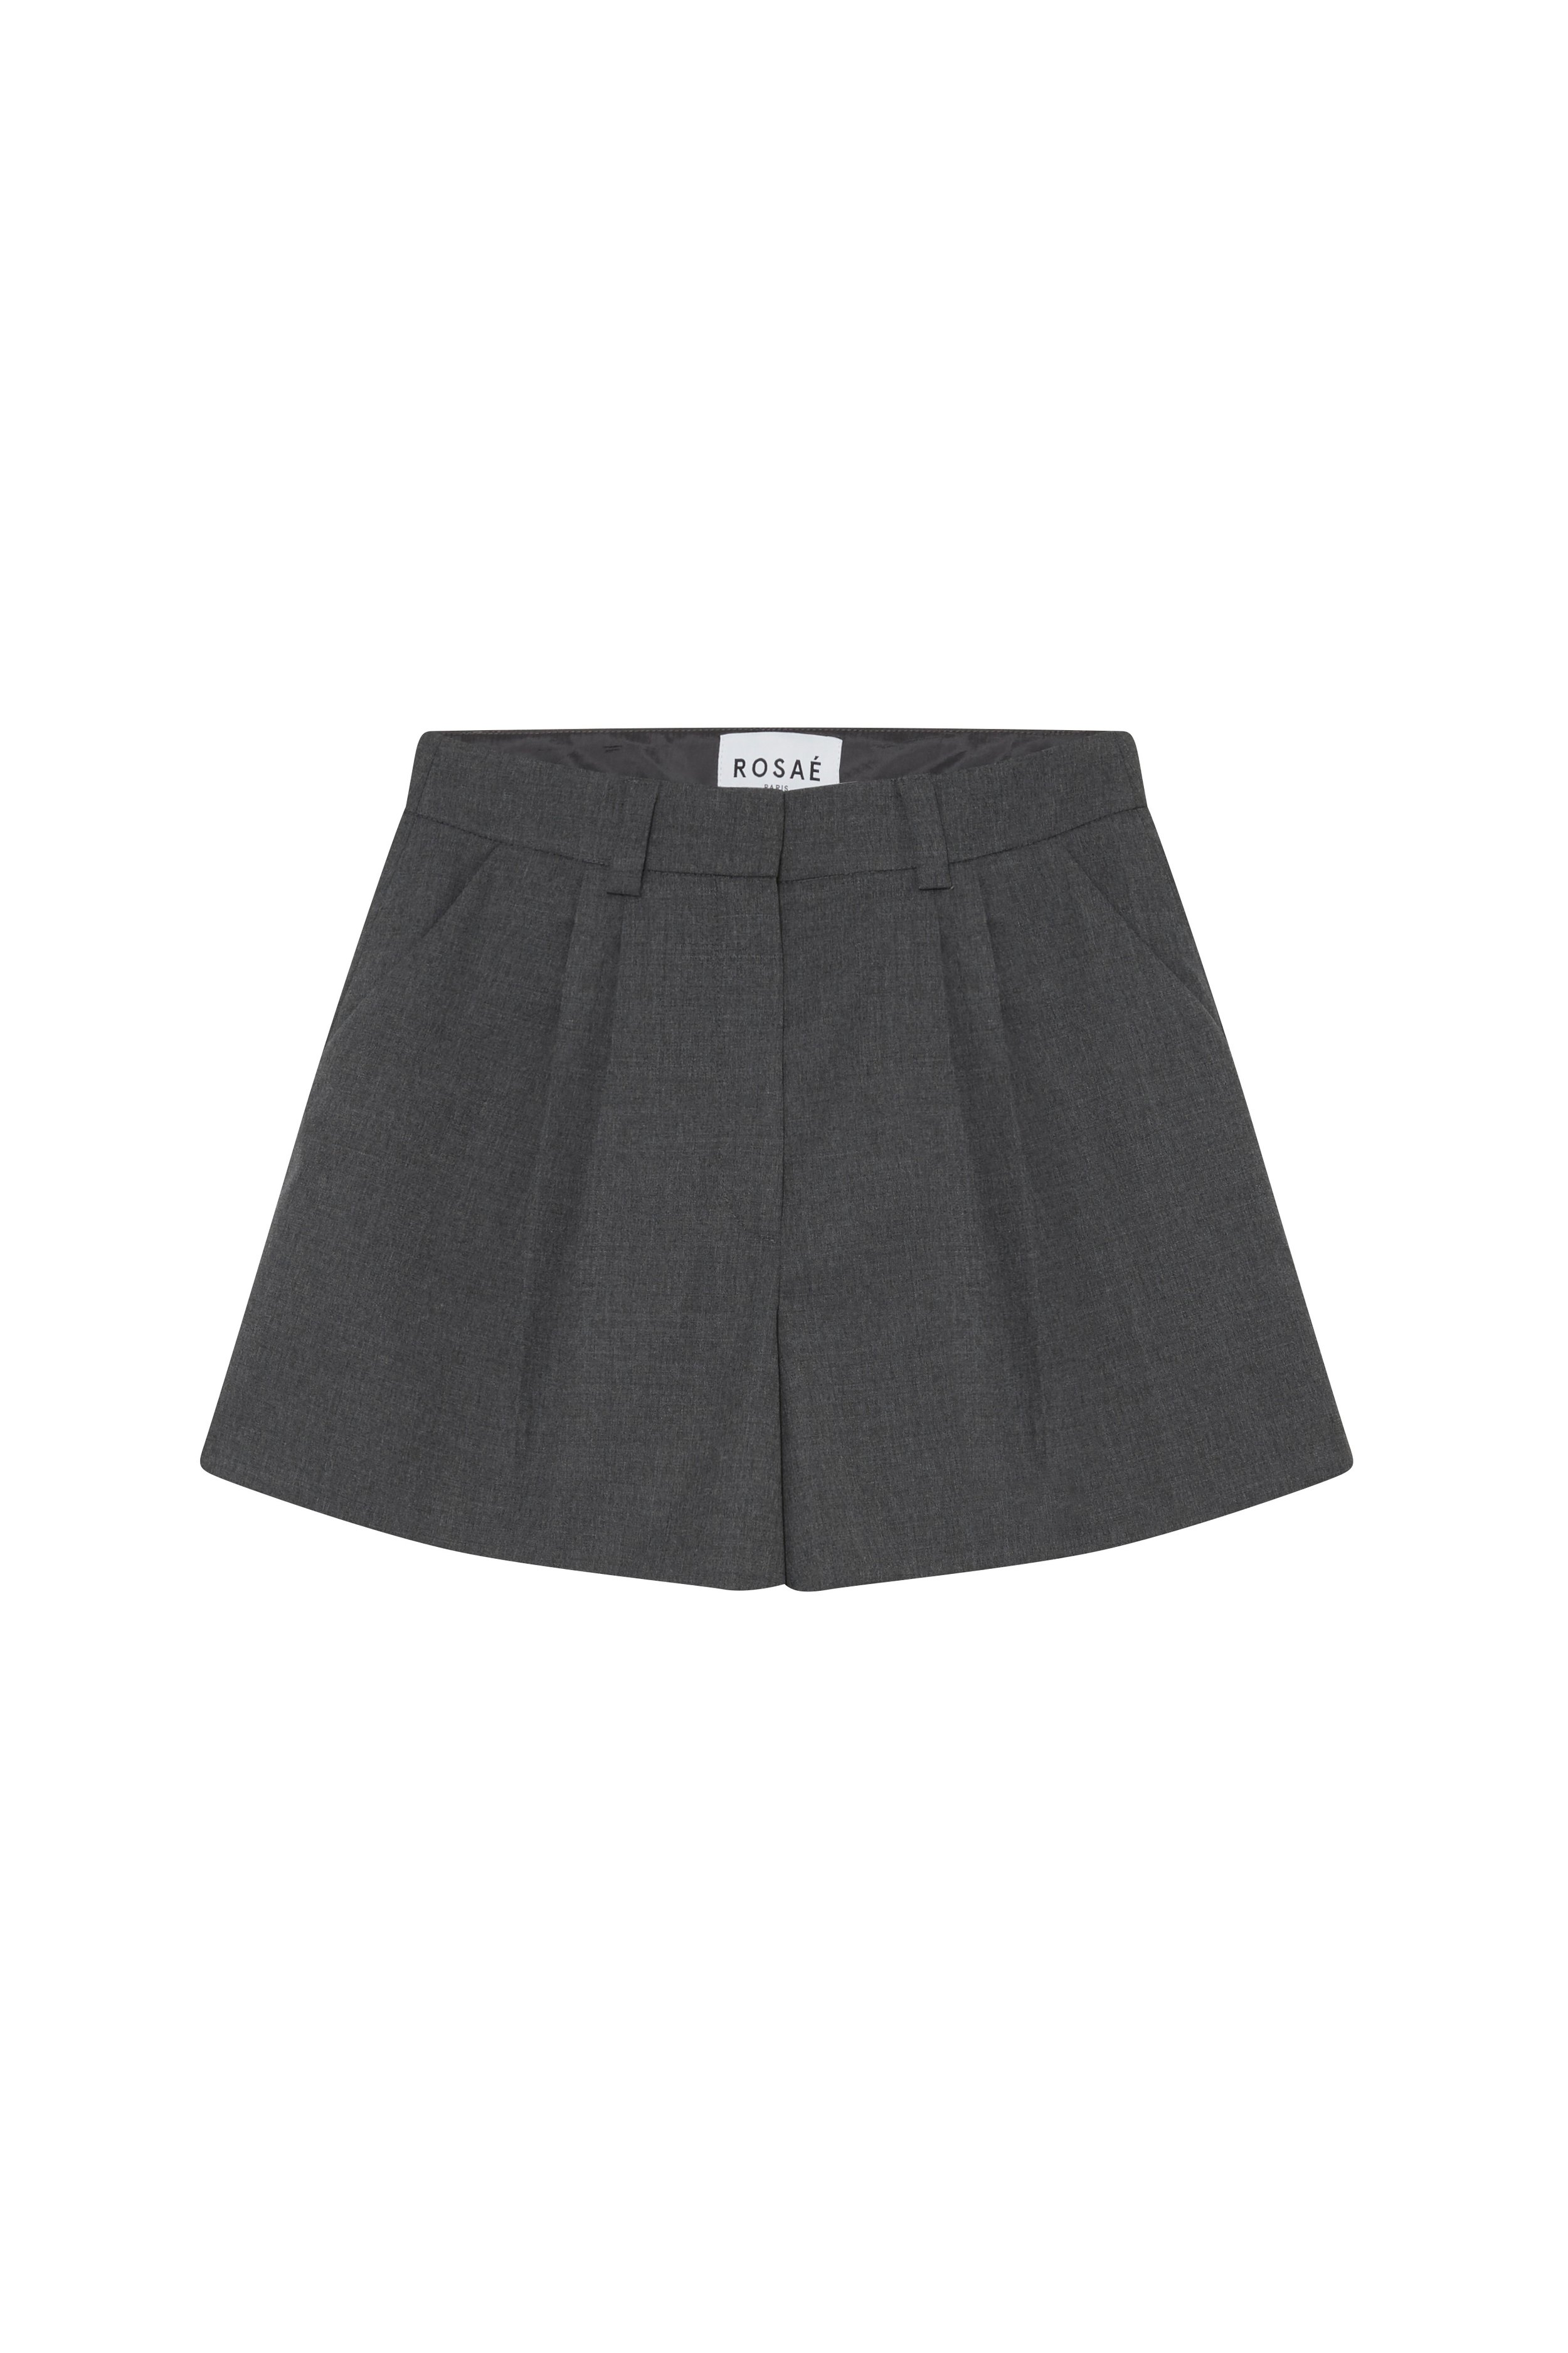 Le Geoffrey - The Masculine Feminine Oversized Shorts to Wear as a Suit ...